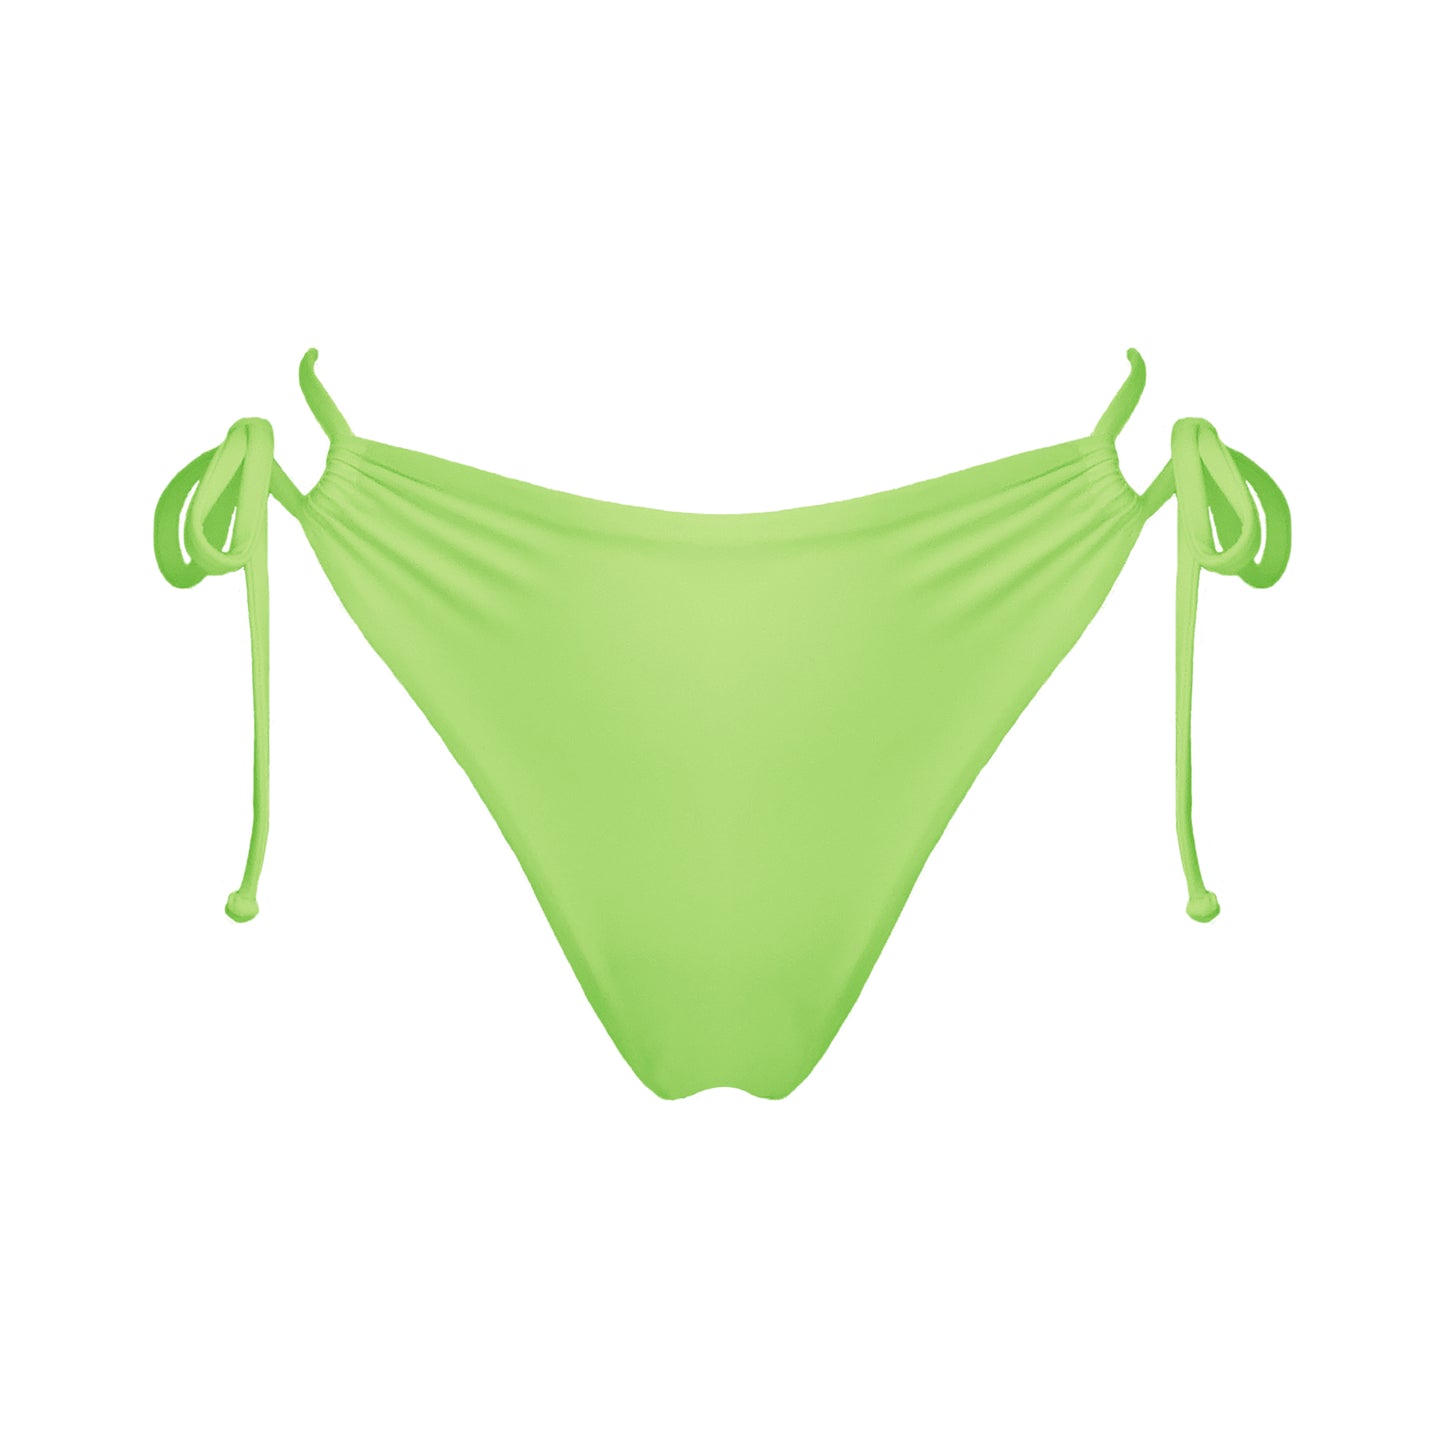 Light neon green strappy mid-rise bikini bottoms with high cut legs and cheeky coverage.